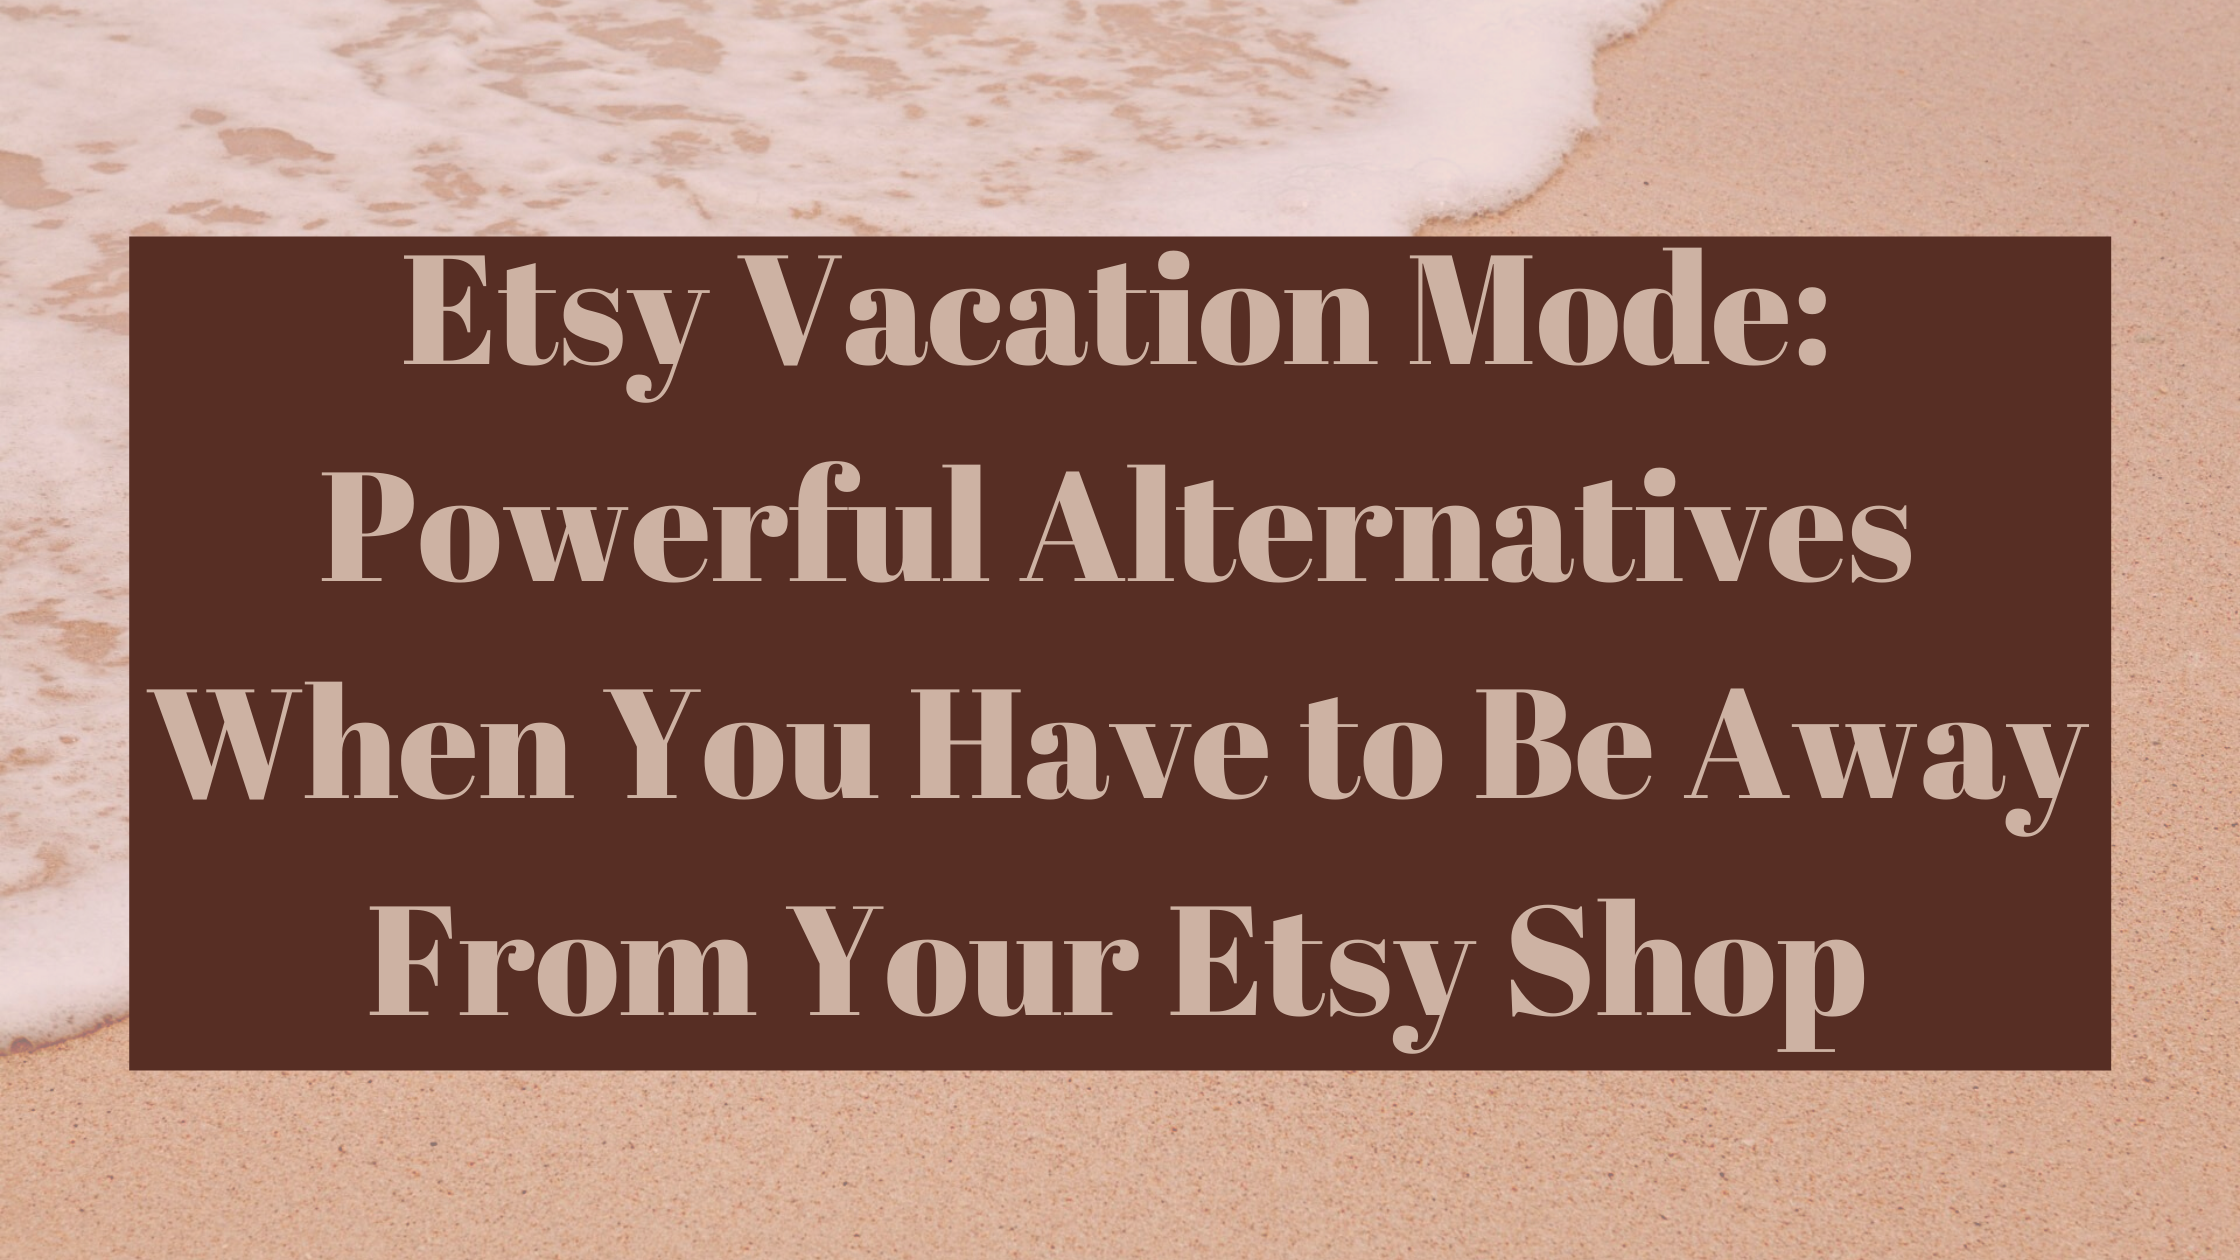 etsy-vacation-mode-powerful-alternatives-when-you-have-to-be-away-from